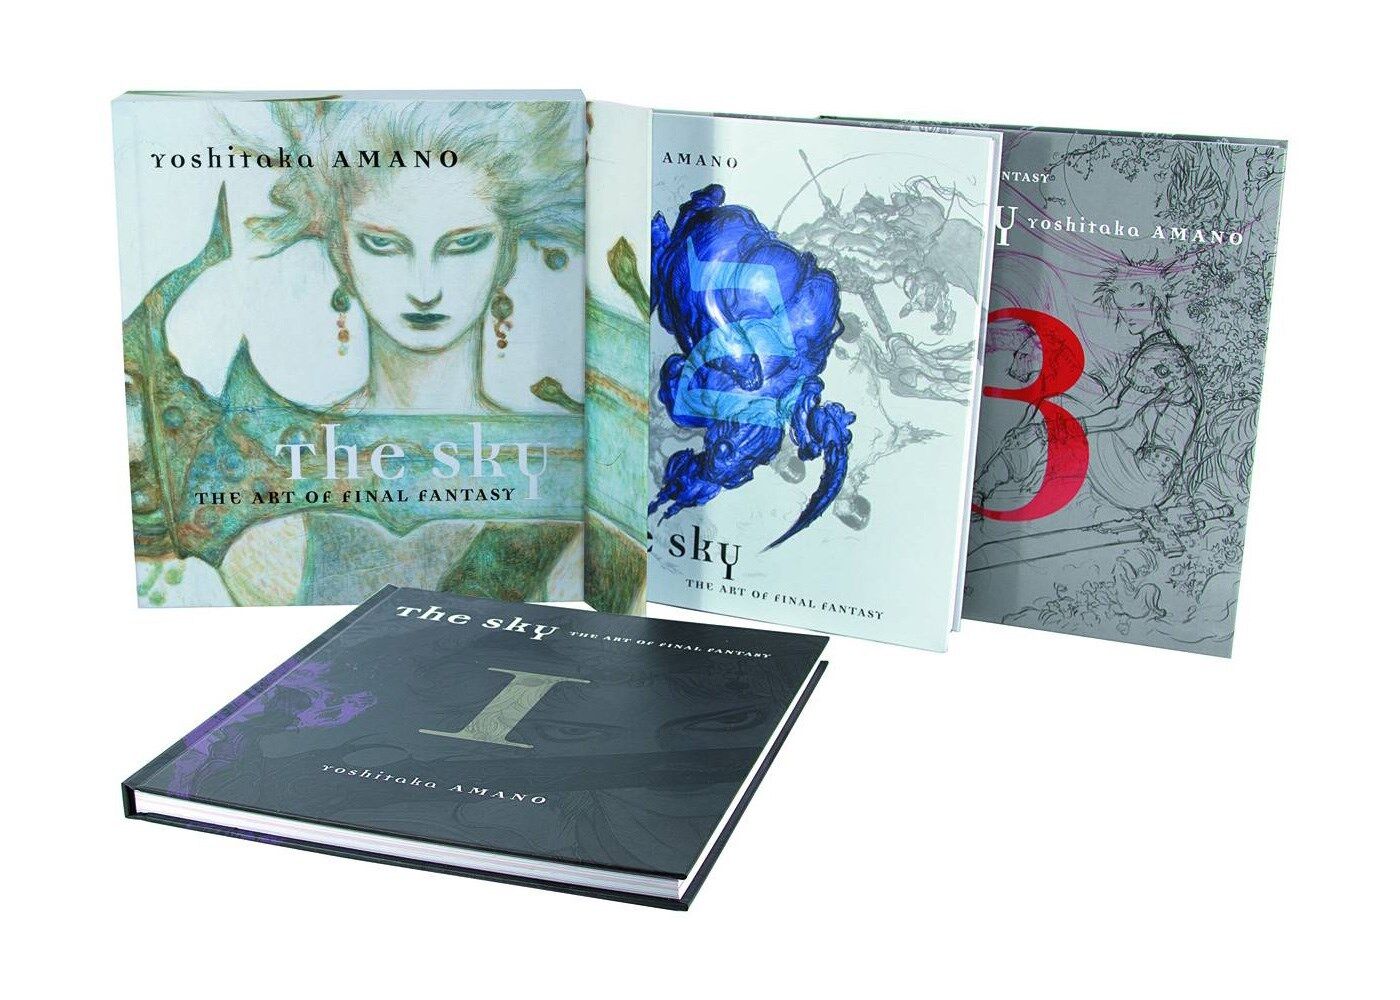 The Sky: The Art of Final Fantasy Boxed Set